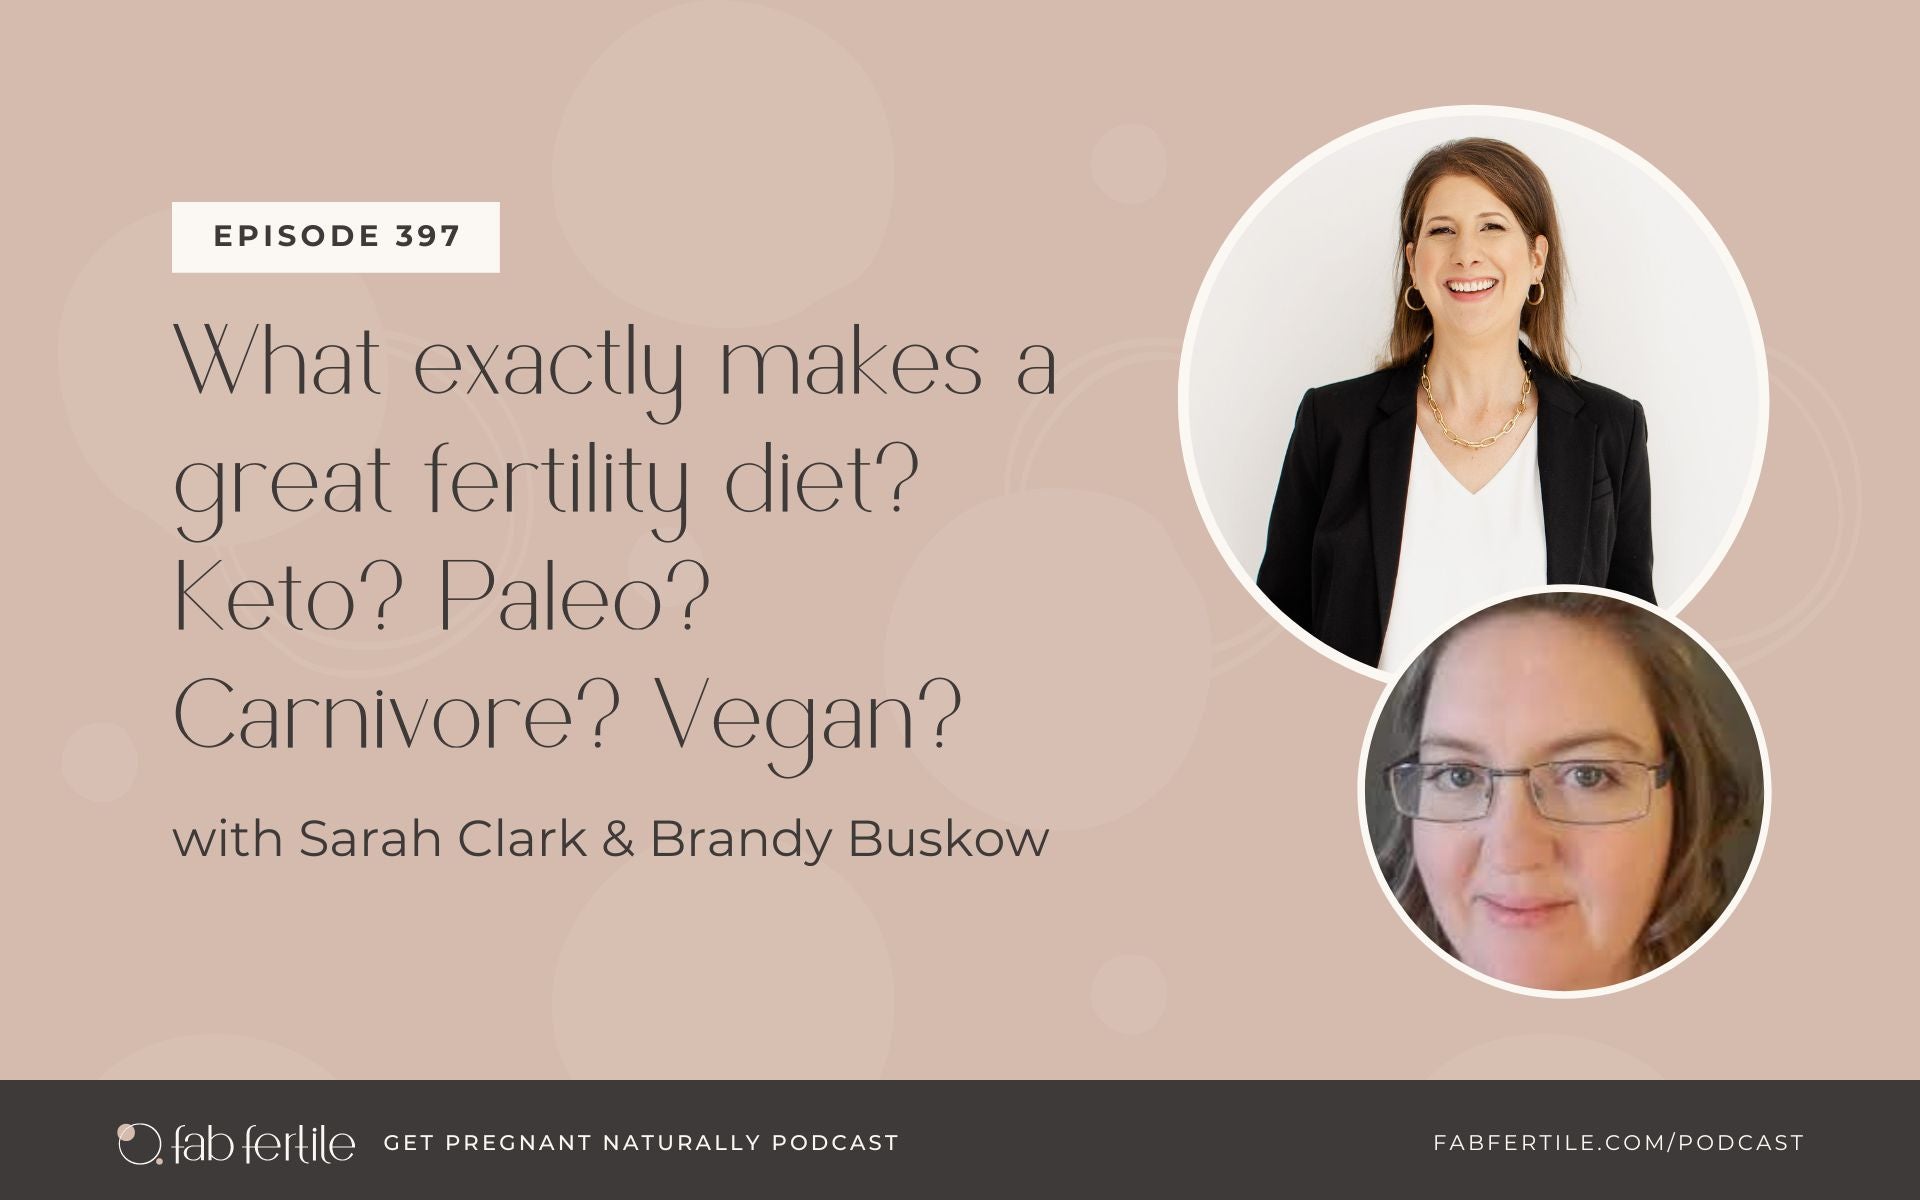 What exactly makes a great fertility diet? Keto? Paleo? Carnivore? Vegan?